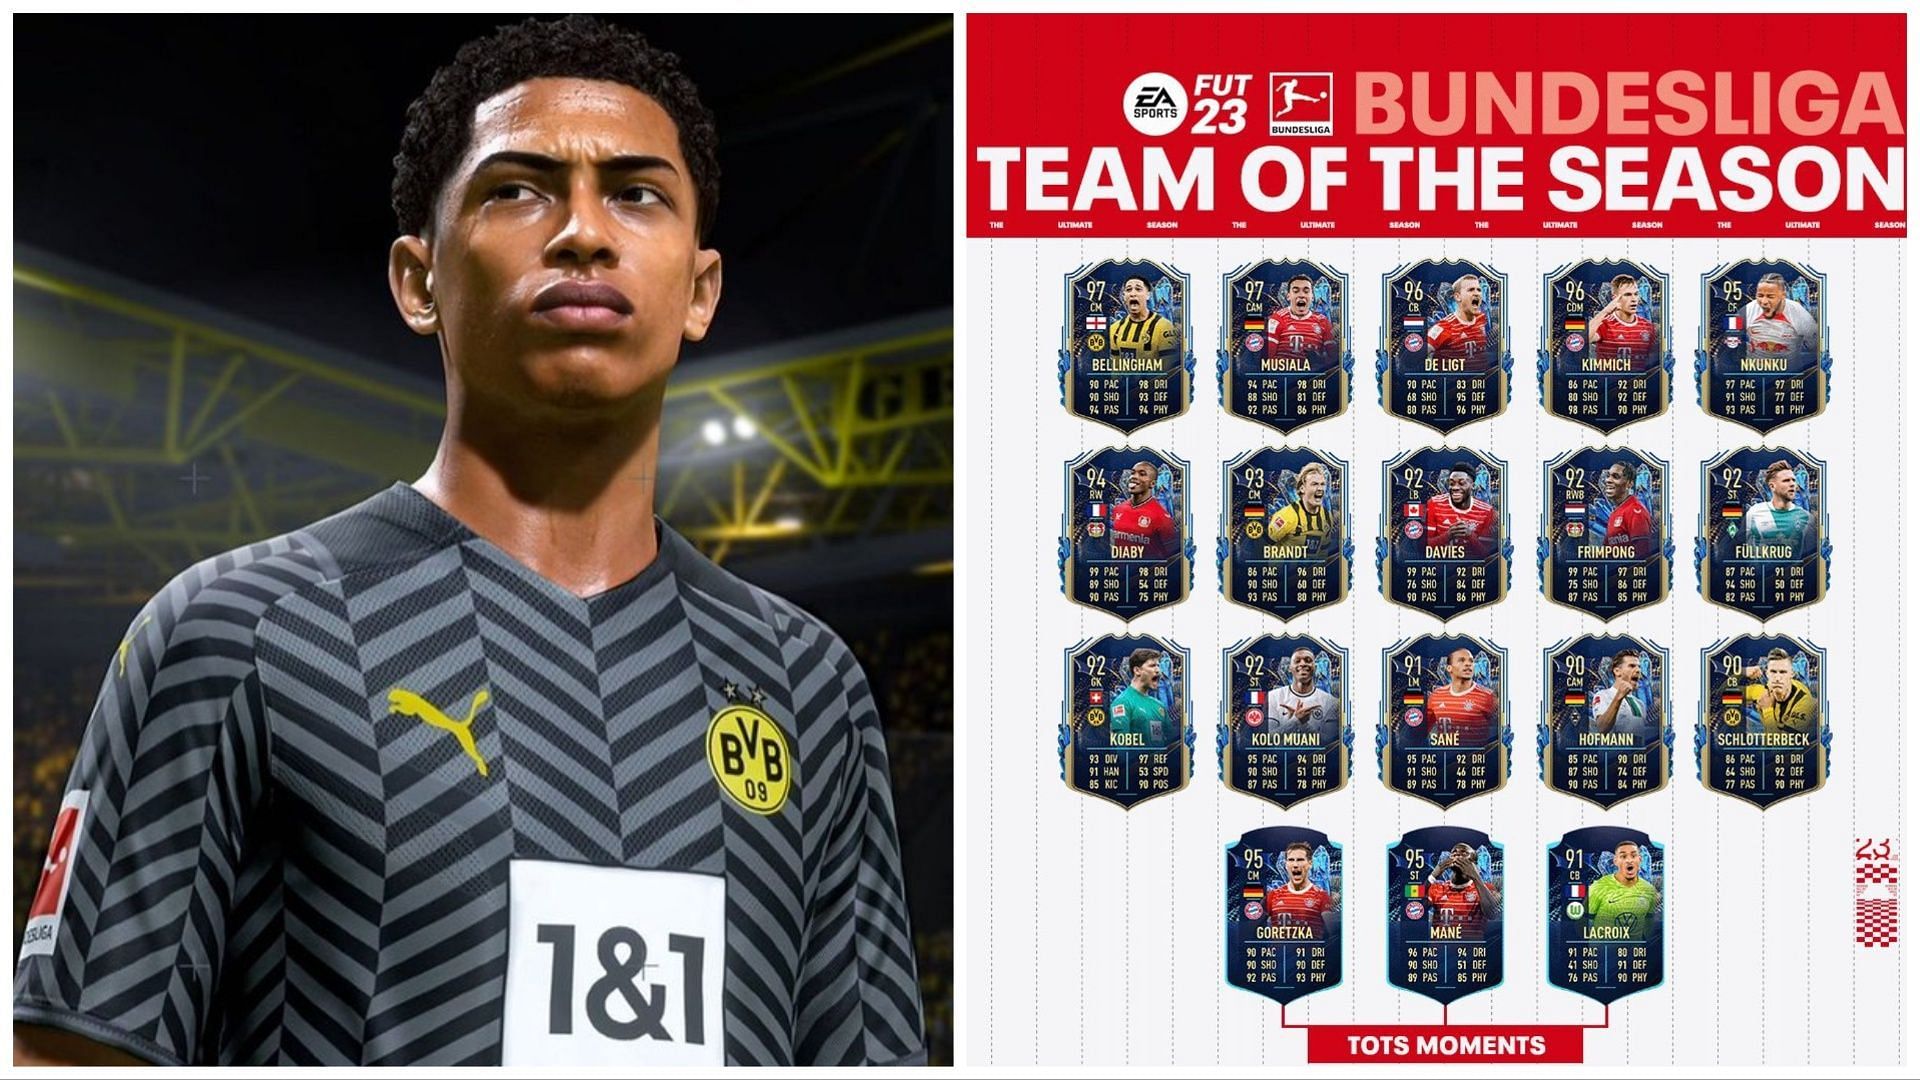 Bundesliga TOTS is now live in FIFA 23 (Images via EA Sports)